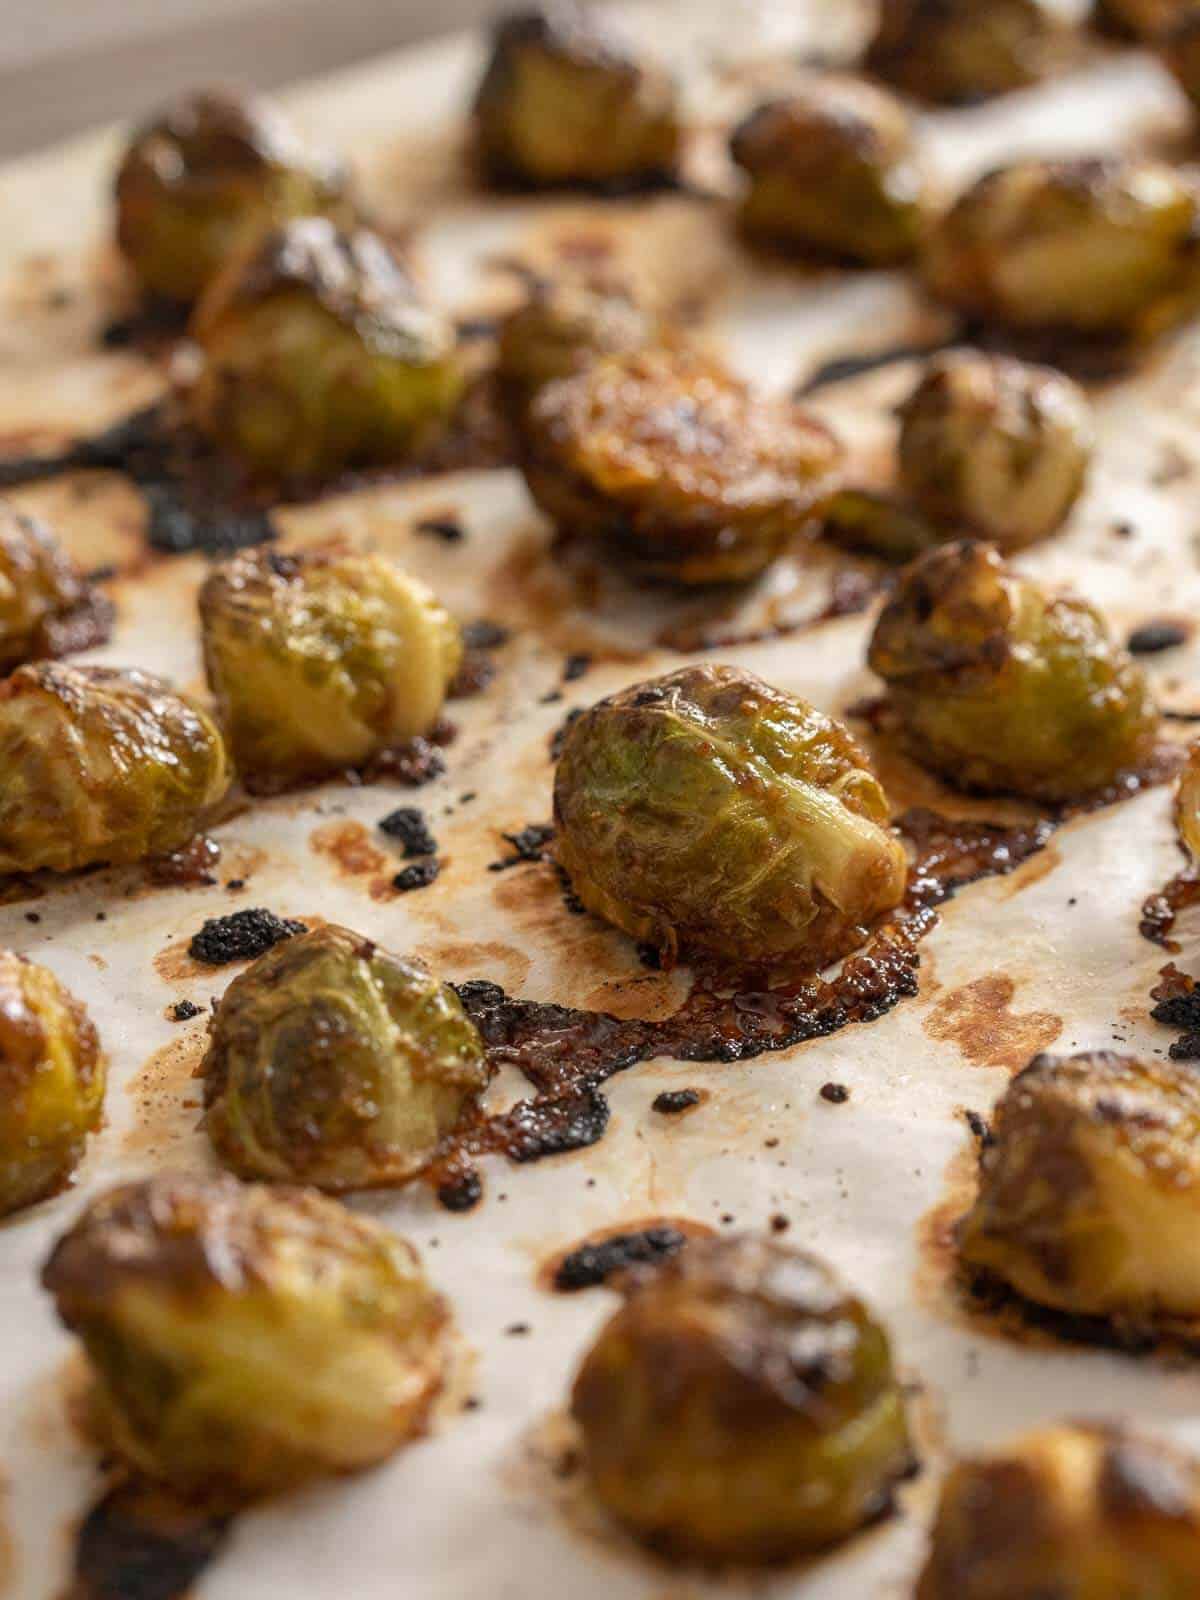 remove candied Brussels sprouts from the oven as soon as they are perfectly roasted.